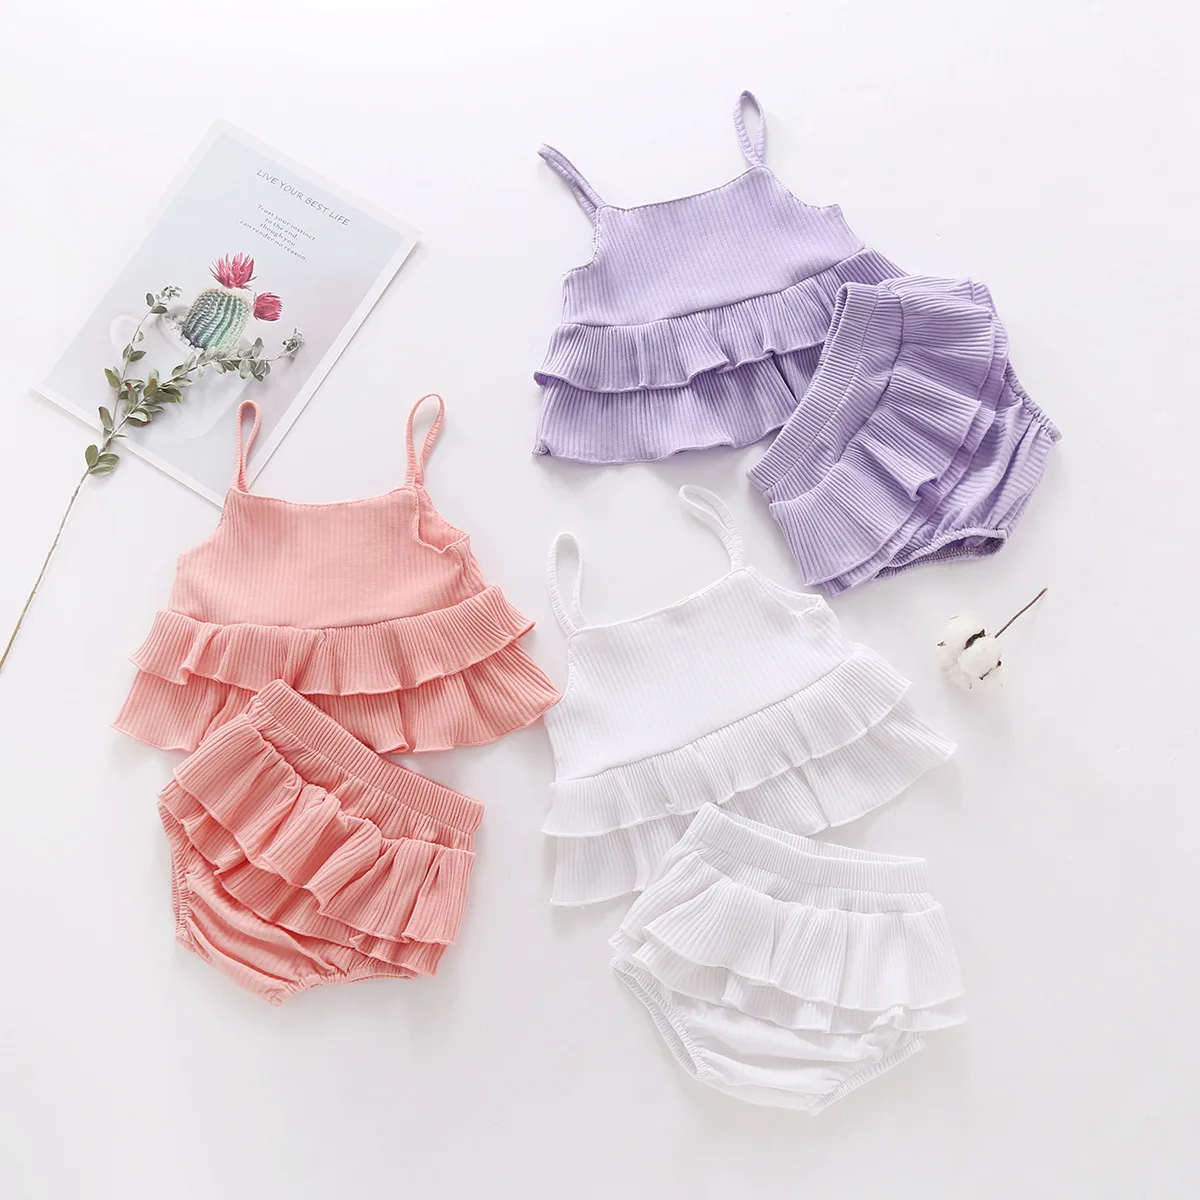 Ins Korean Baby Summer Baby Clothes Sling Sleeveless Top+Solid Color Pit Lace Shorts Suit Toddler Newborn Girl Baby Clothes 2Pcs